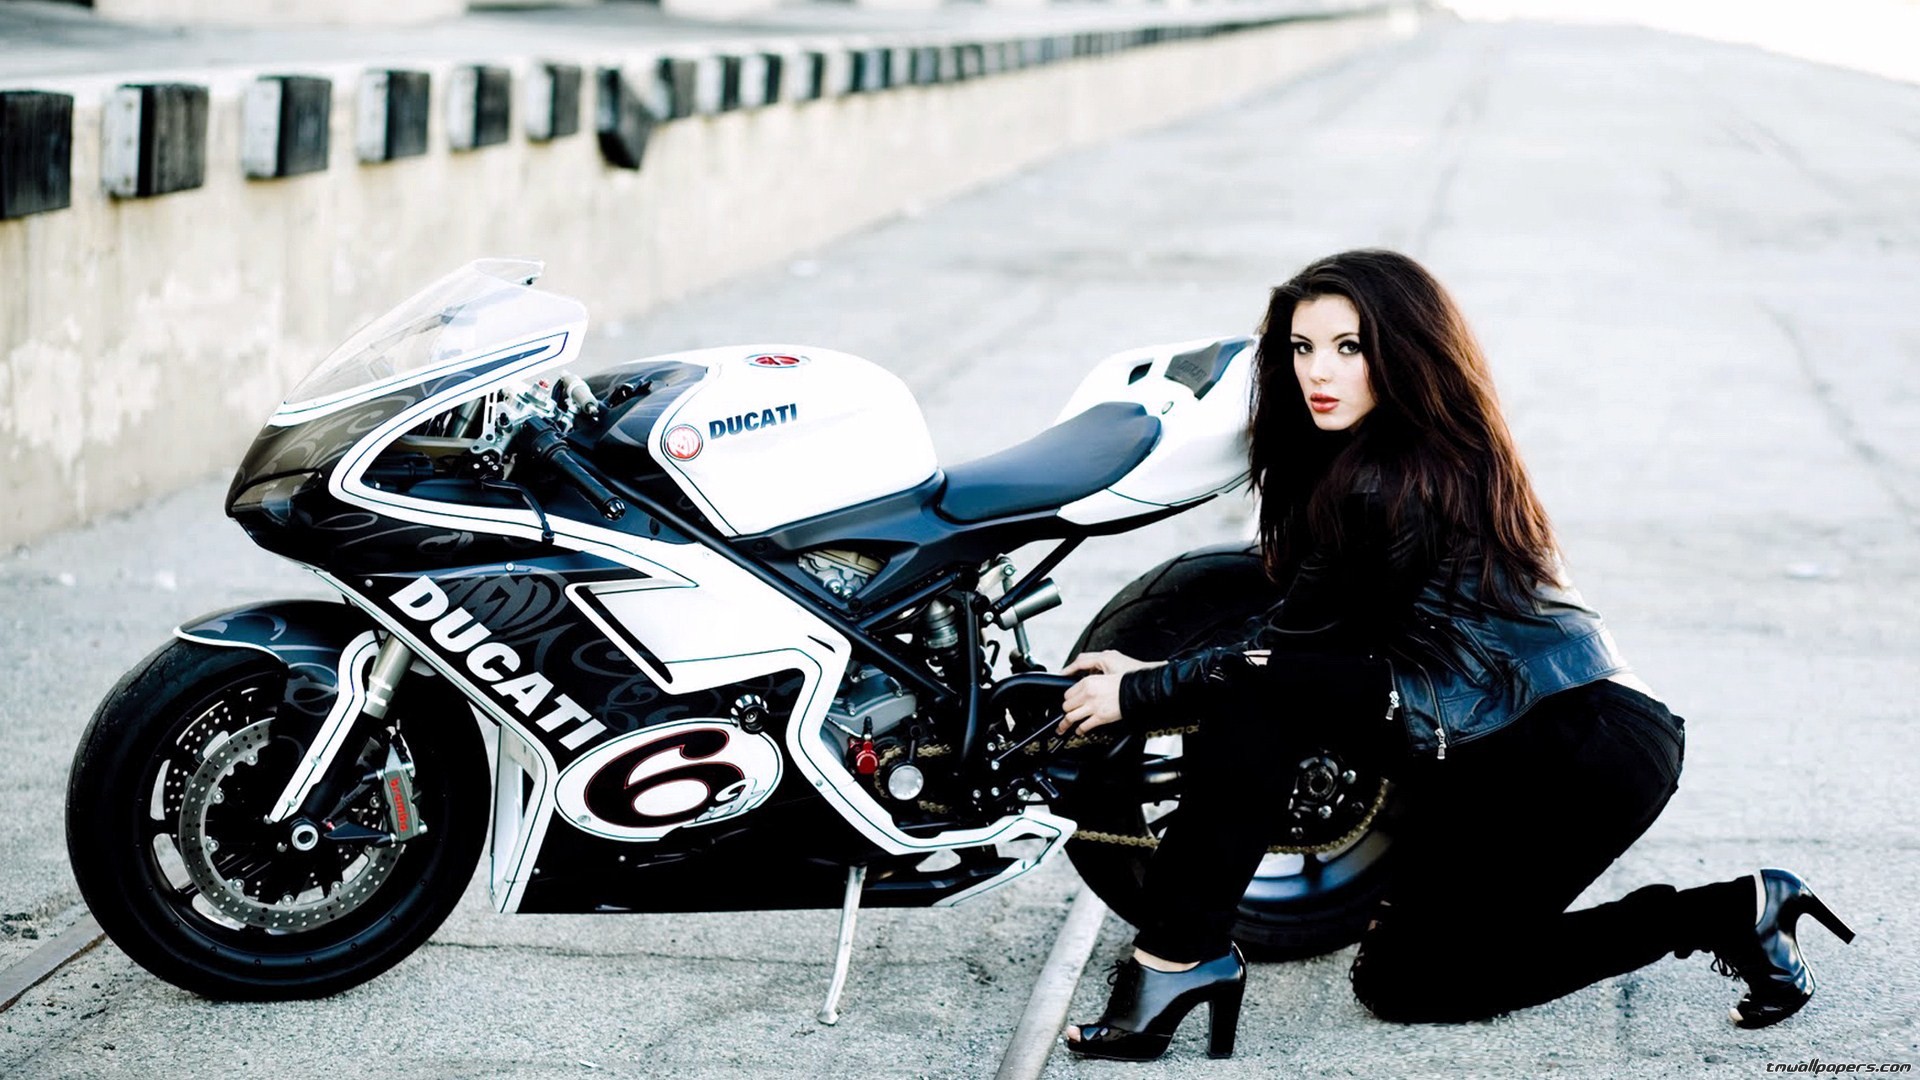 Motorcycle girls wallpaper free funny photos pictures images 2013